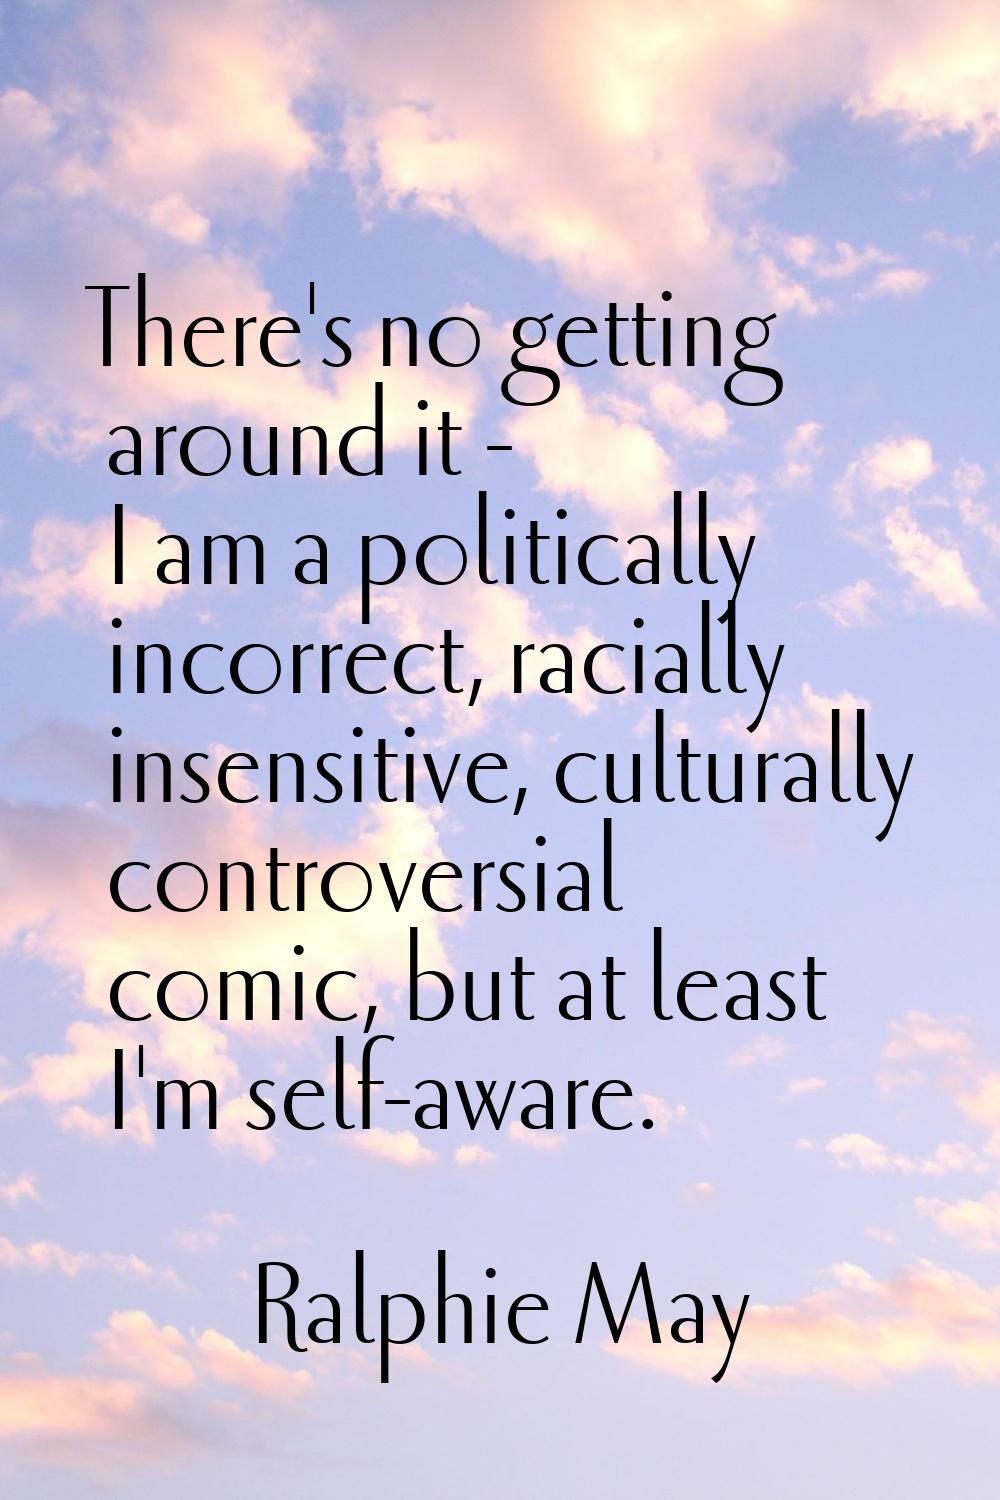 There's no getting around it - I am a politically incorrect, racially insensitive, culturally contr